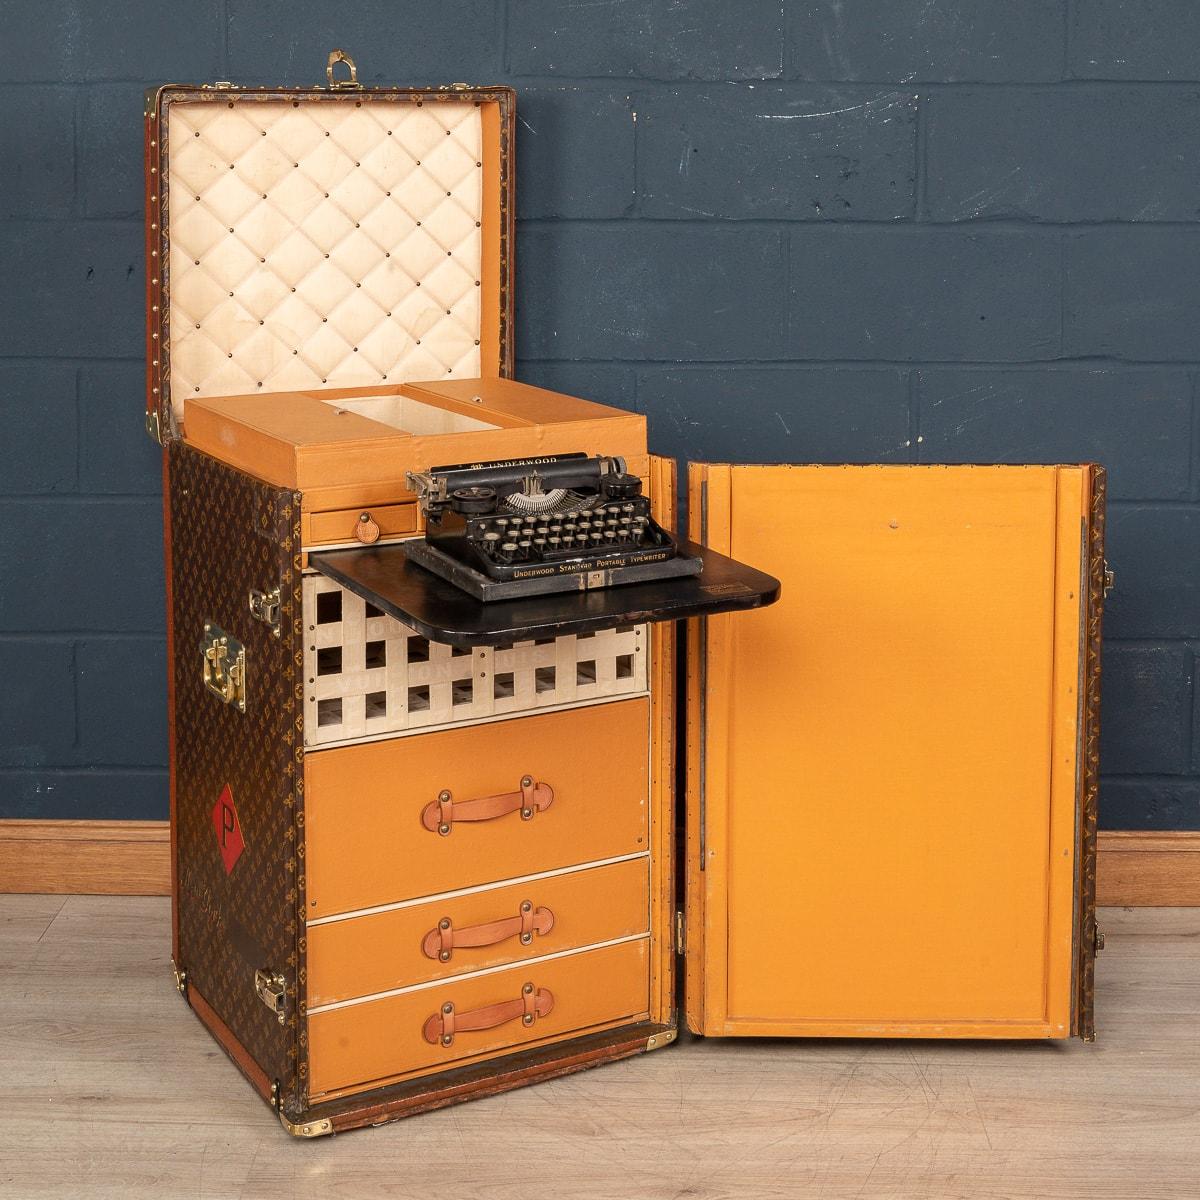 One of the rarest of Louis Vuitton trunks in circulation is the “malle secretaire“ (or desk trunk). This is a superb example of such a trunk, completely original and dating to the early part of the 20th century.

Condition
In good condition -